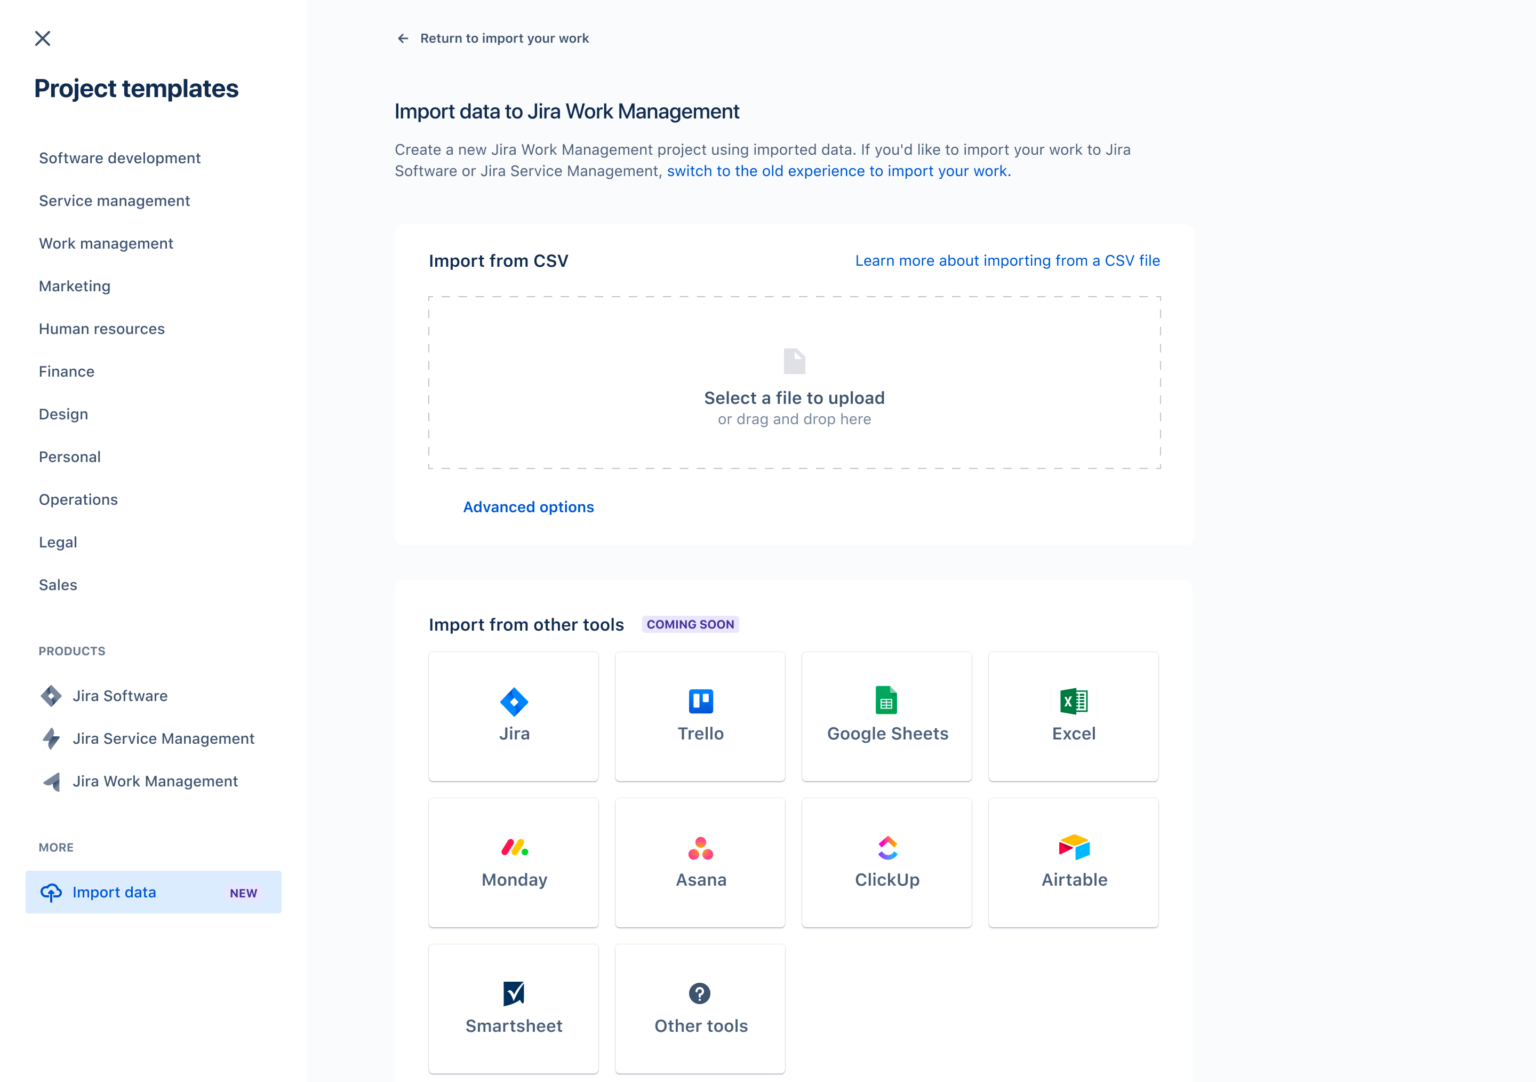 Jira Work Management - Bridging the Gap between Technical and Business Team - image showing the Import data option in Jira Work Management and which tools you will be able to import from